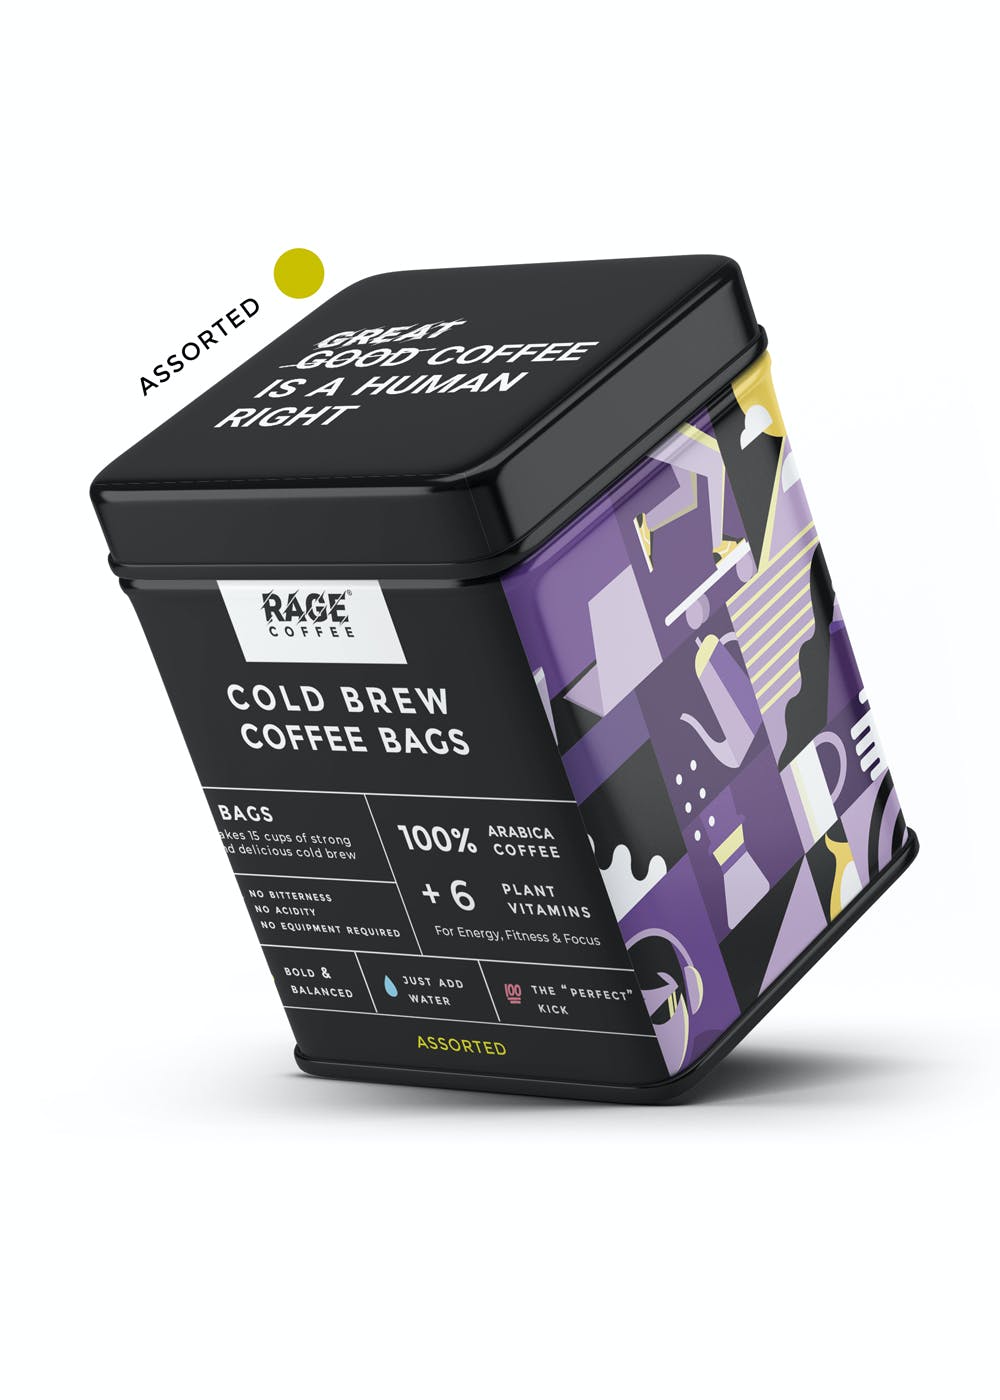 Rage Coffee Cold Brew Coffee Bags Assorted Pack of 5x50 Gms